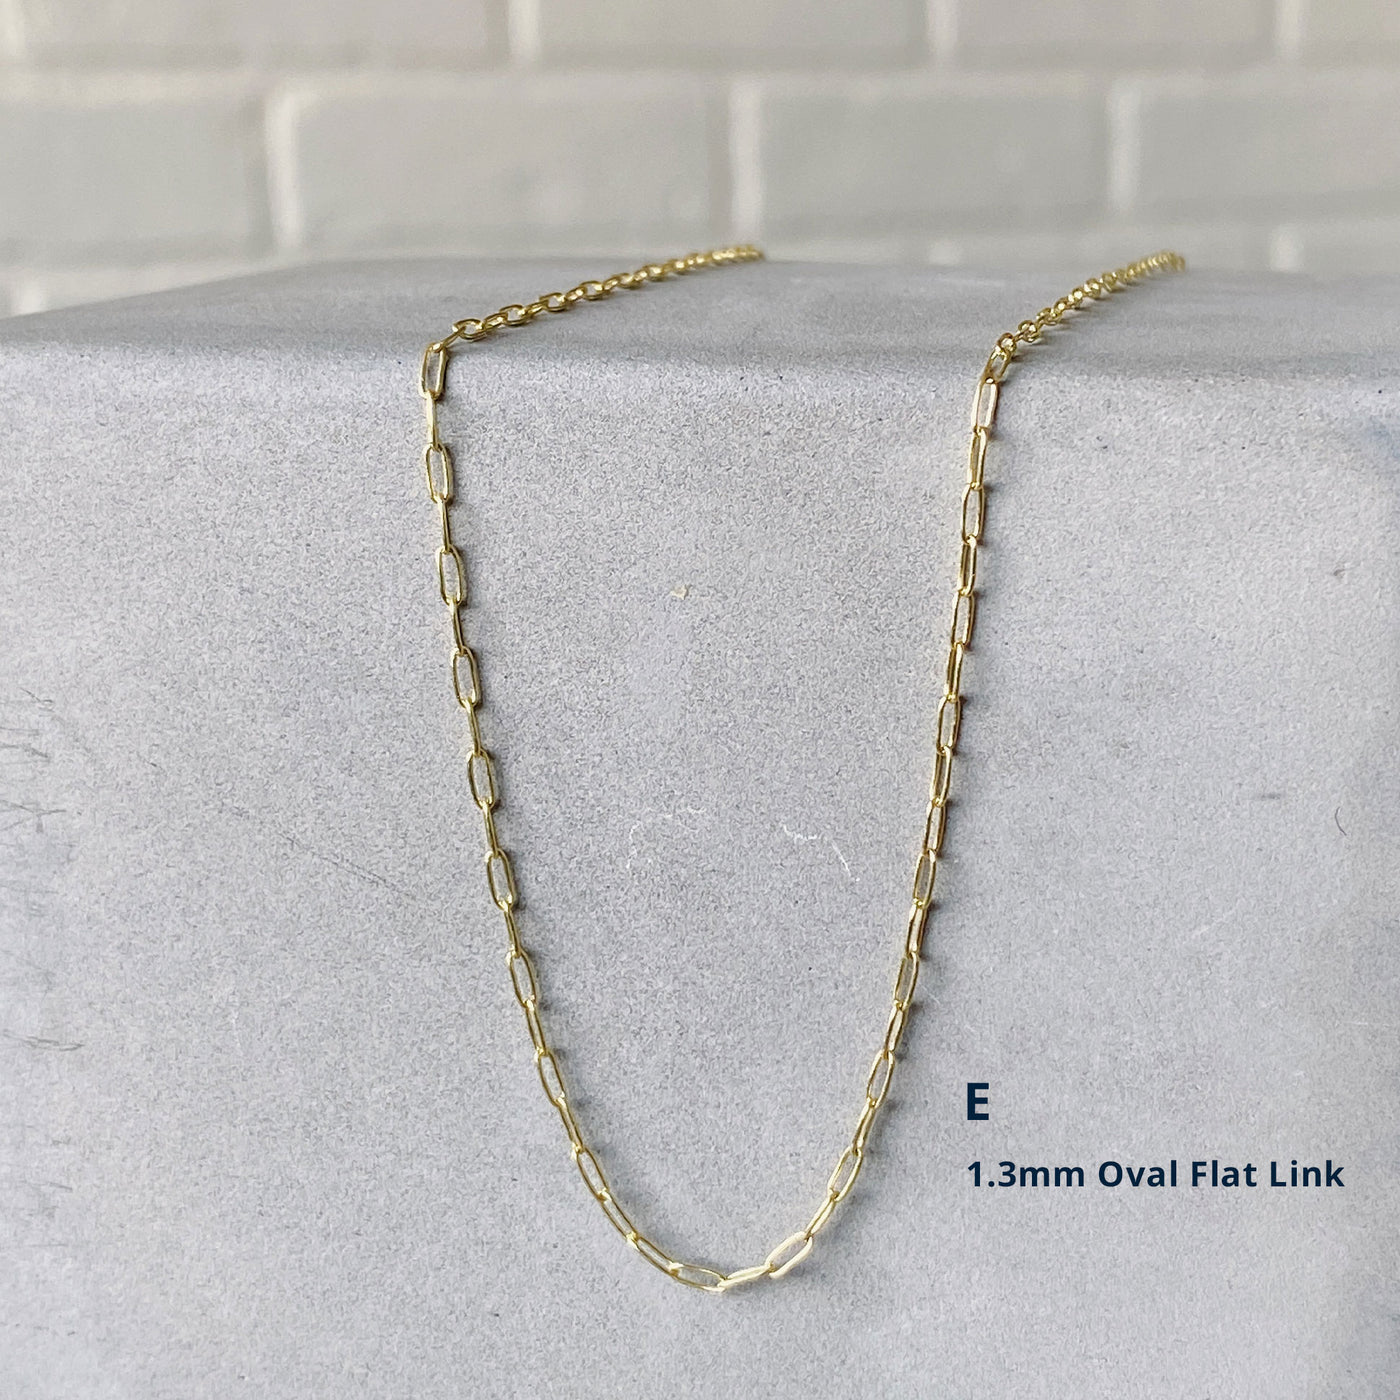 14k yellow gold 1.3mm oval flat link chain